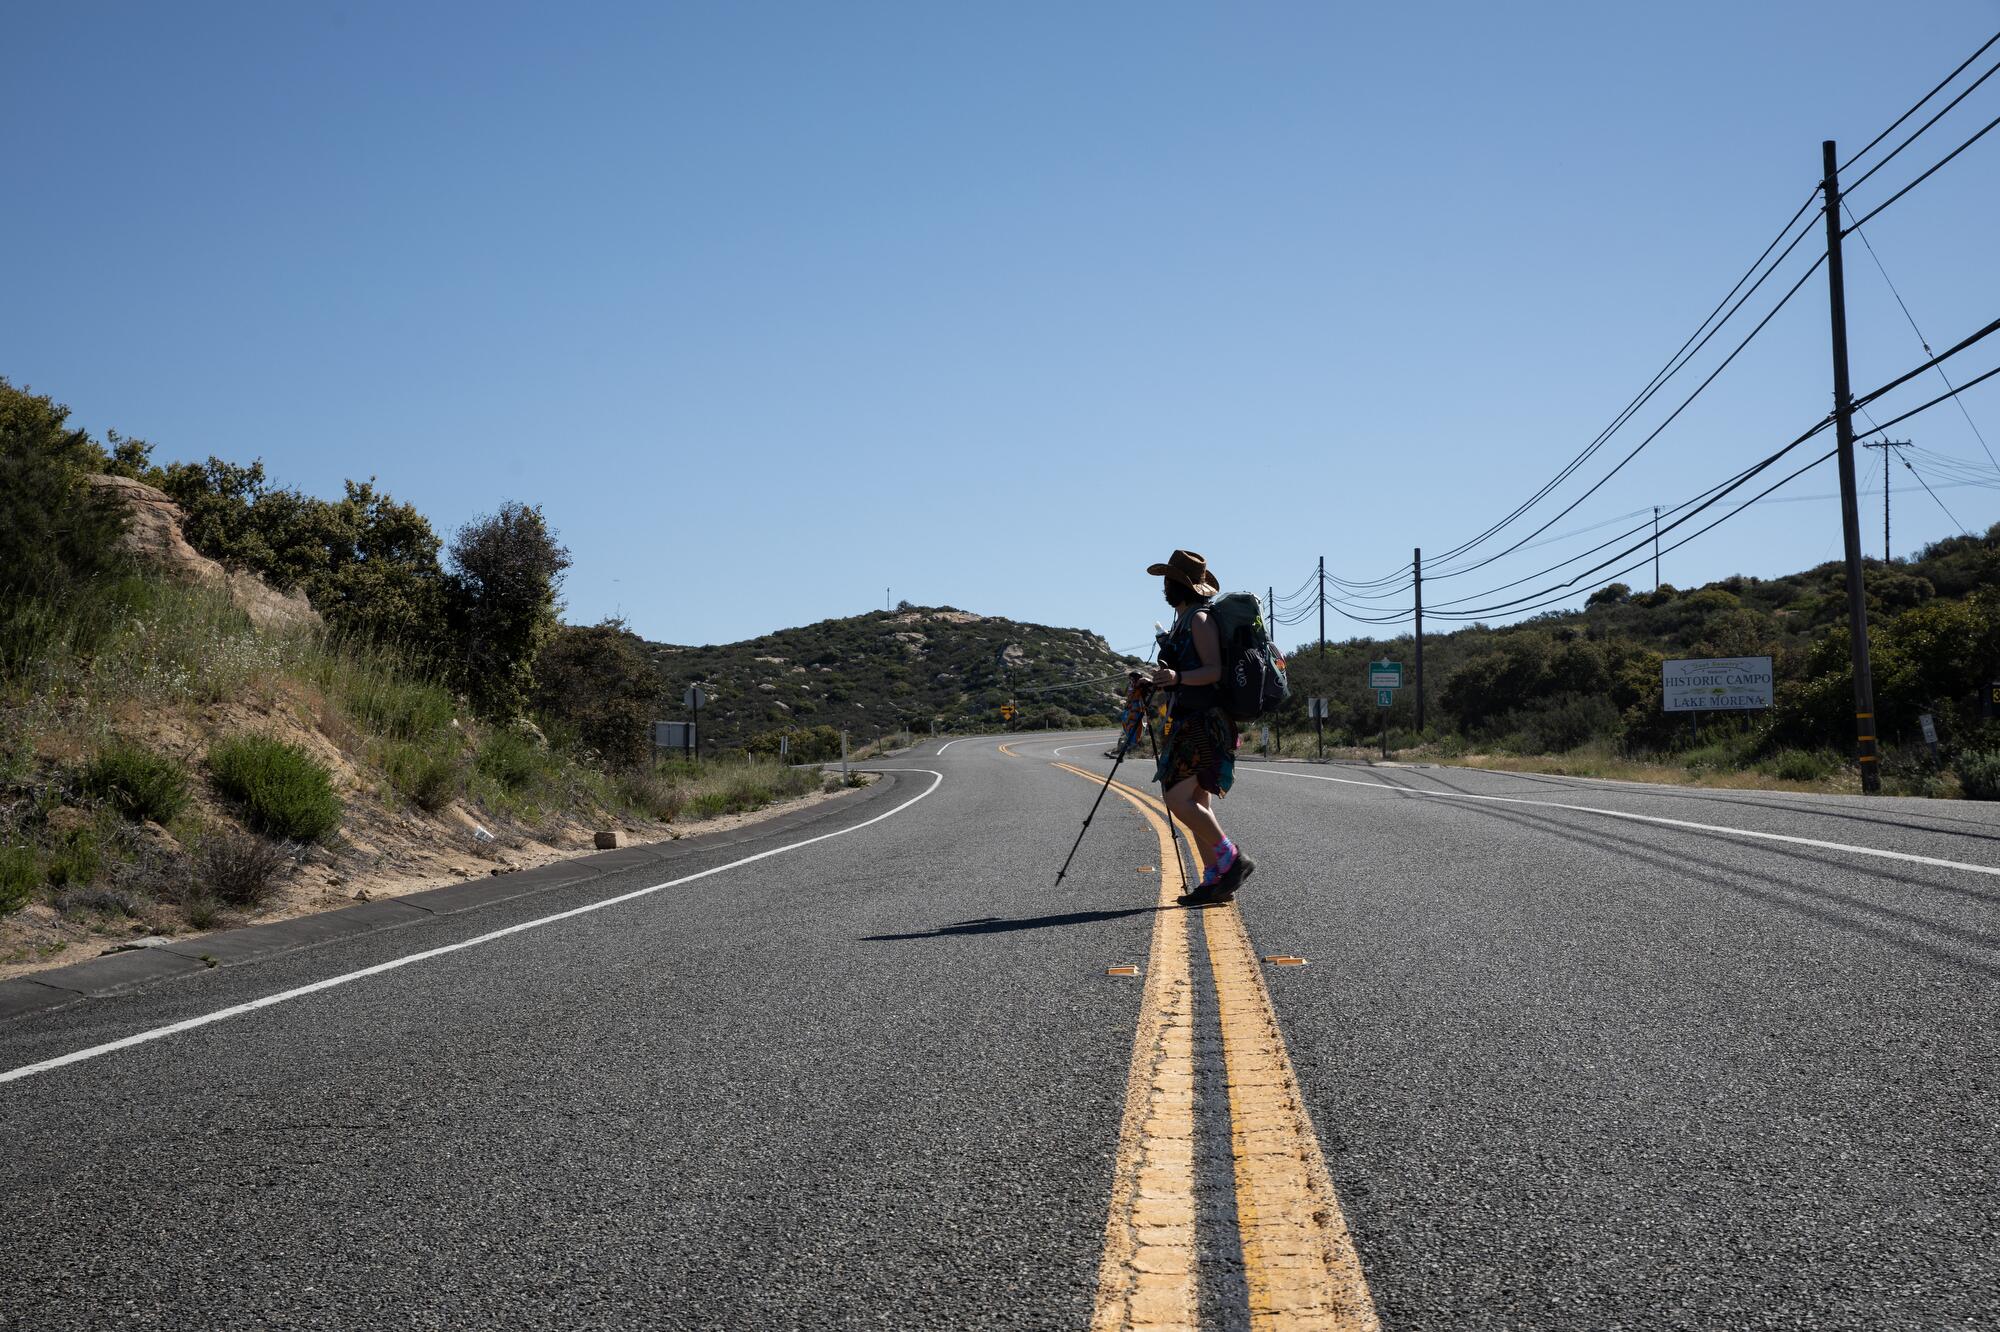 Julianne Smith, 53, of Austin, also known as Gypsy, crosses a road